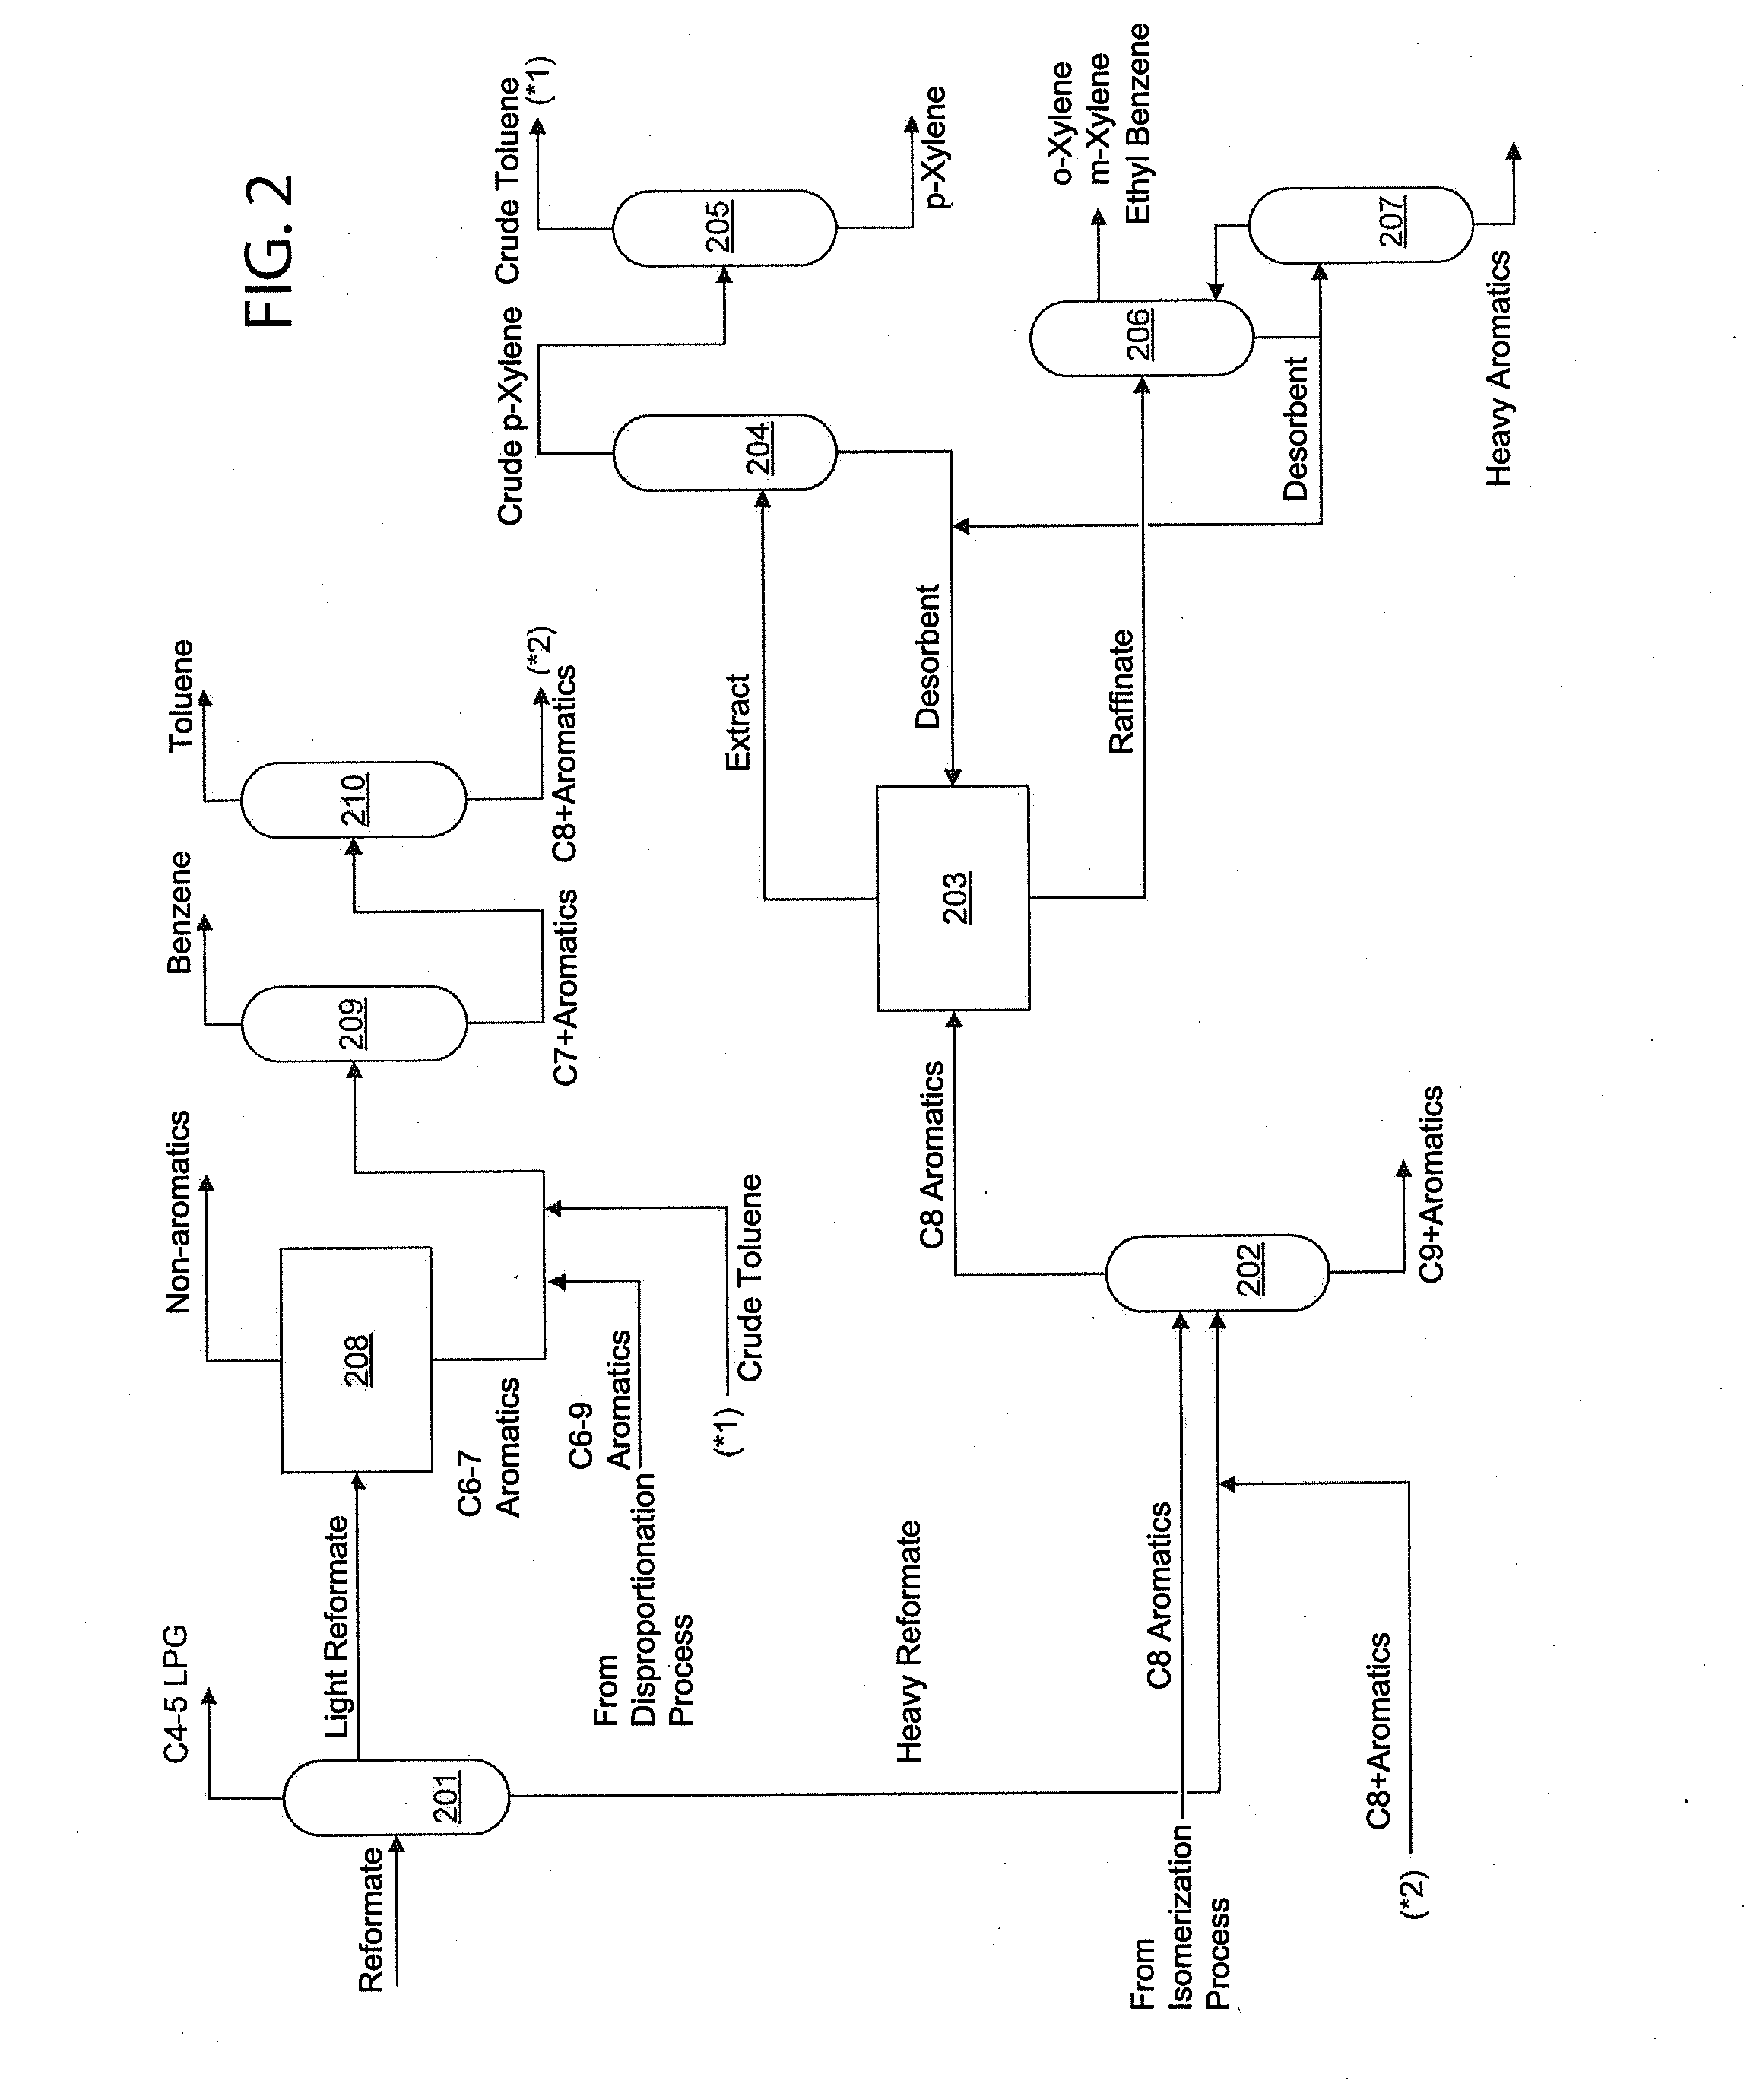 Aromatic hydrocarbon production apparatus